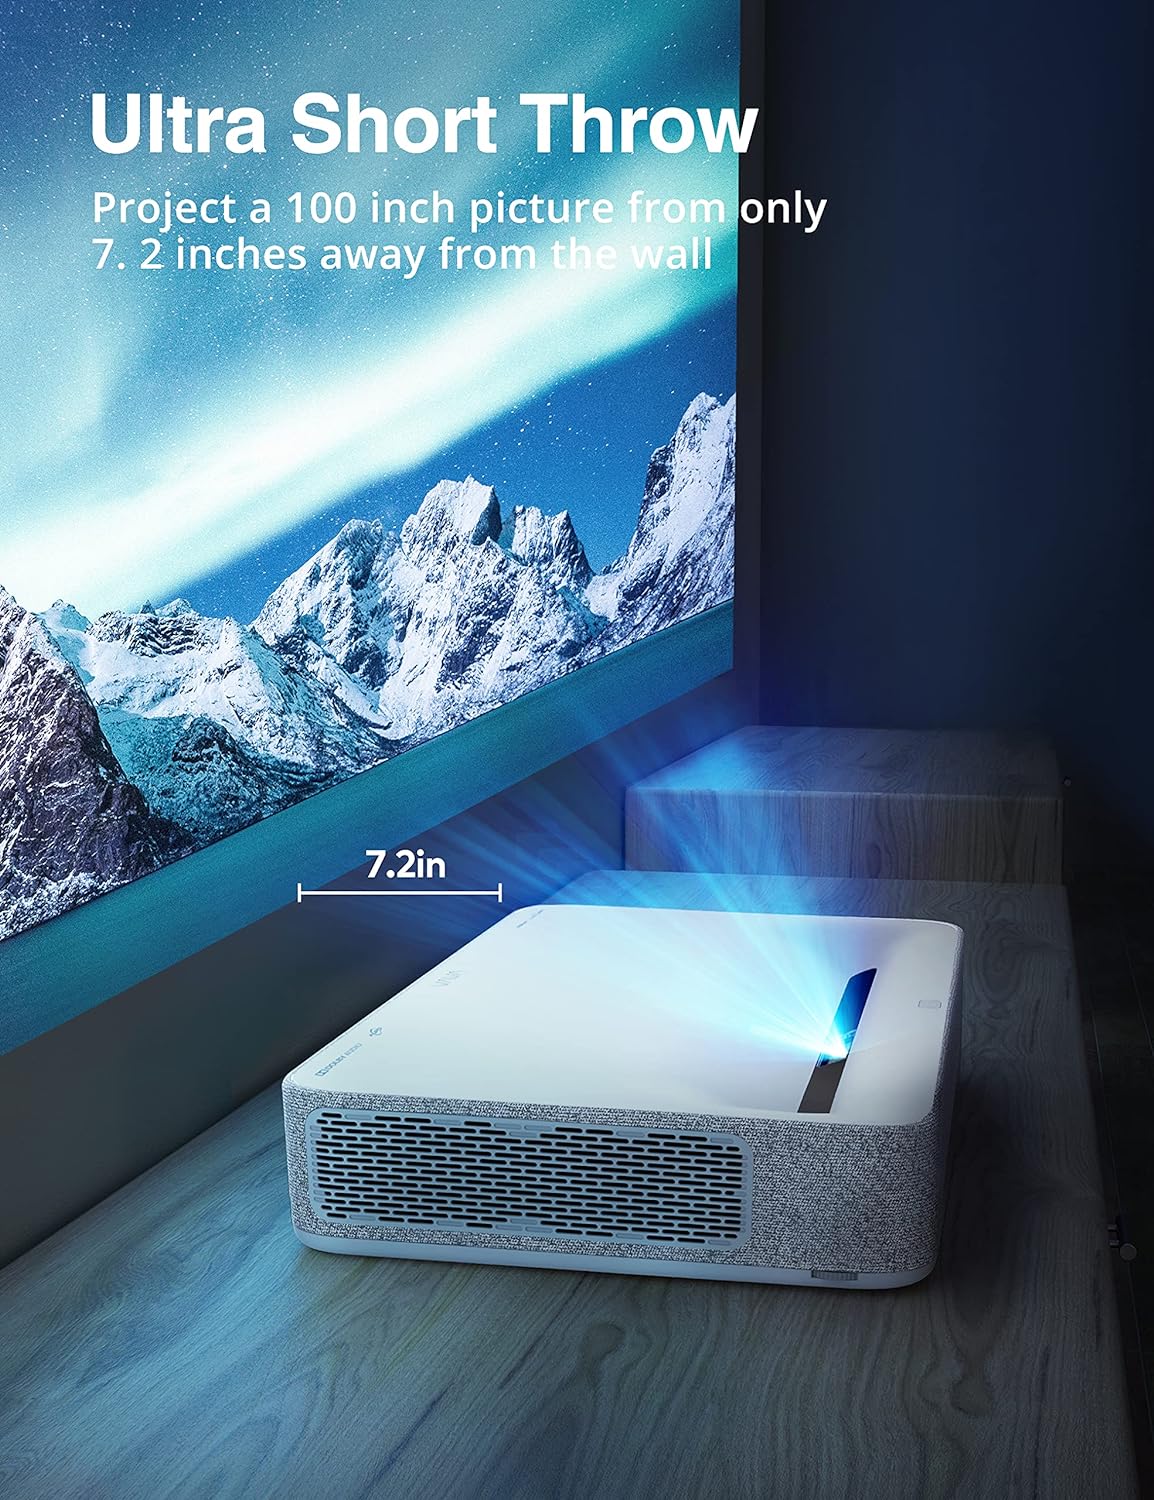 4K Ultra Short Throw Laser TV Home Theatre Projector, 2500 ANSI Lumens, HDR10, DTS and Dolby Audio, for MoviesVideoGaming, Easy Installation